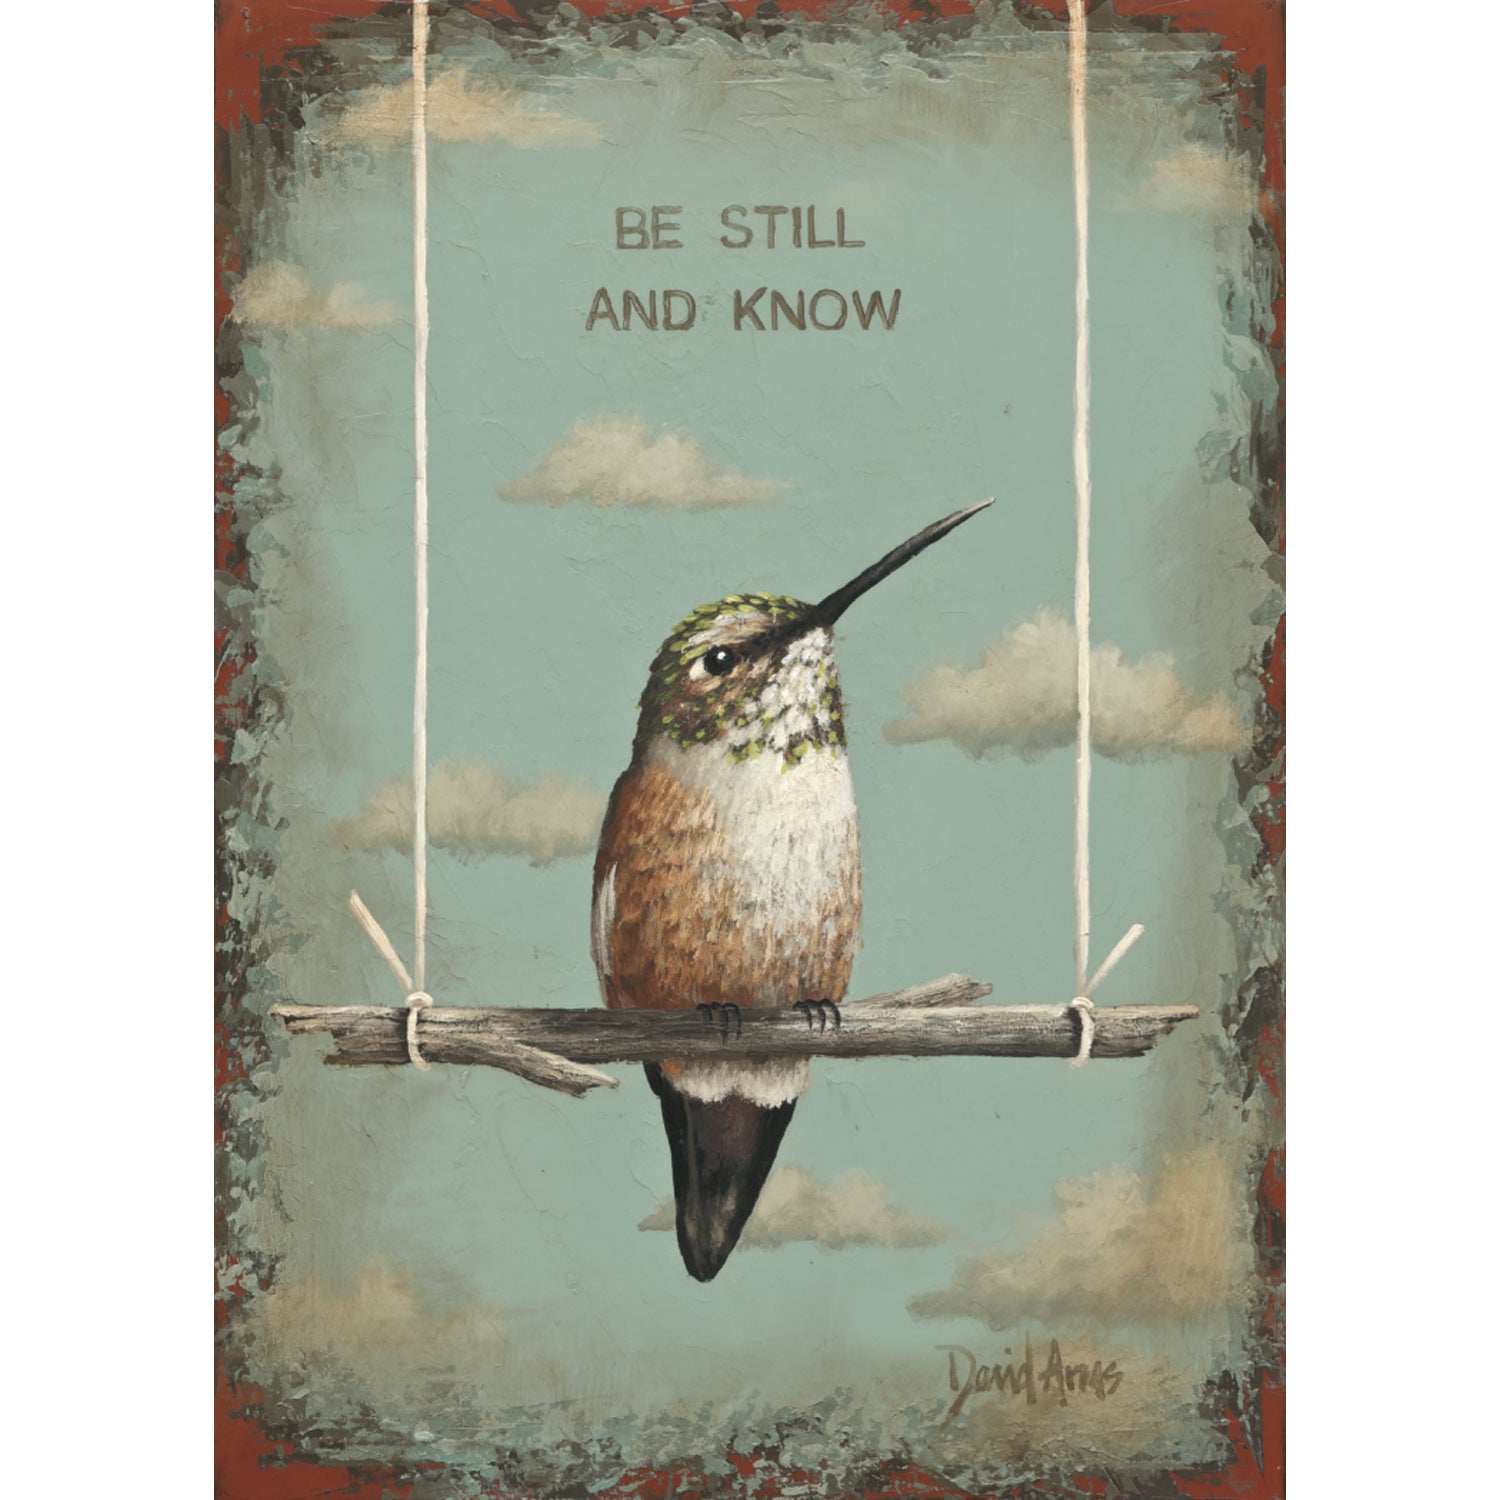 An illustration of a hummingbird resting on a twig held aloft by two white strings over a teal blue sky background with clouds, &quot;BE STILL AND KNOW&quot; printed above the bird.